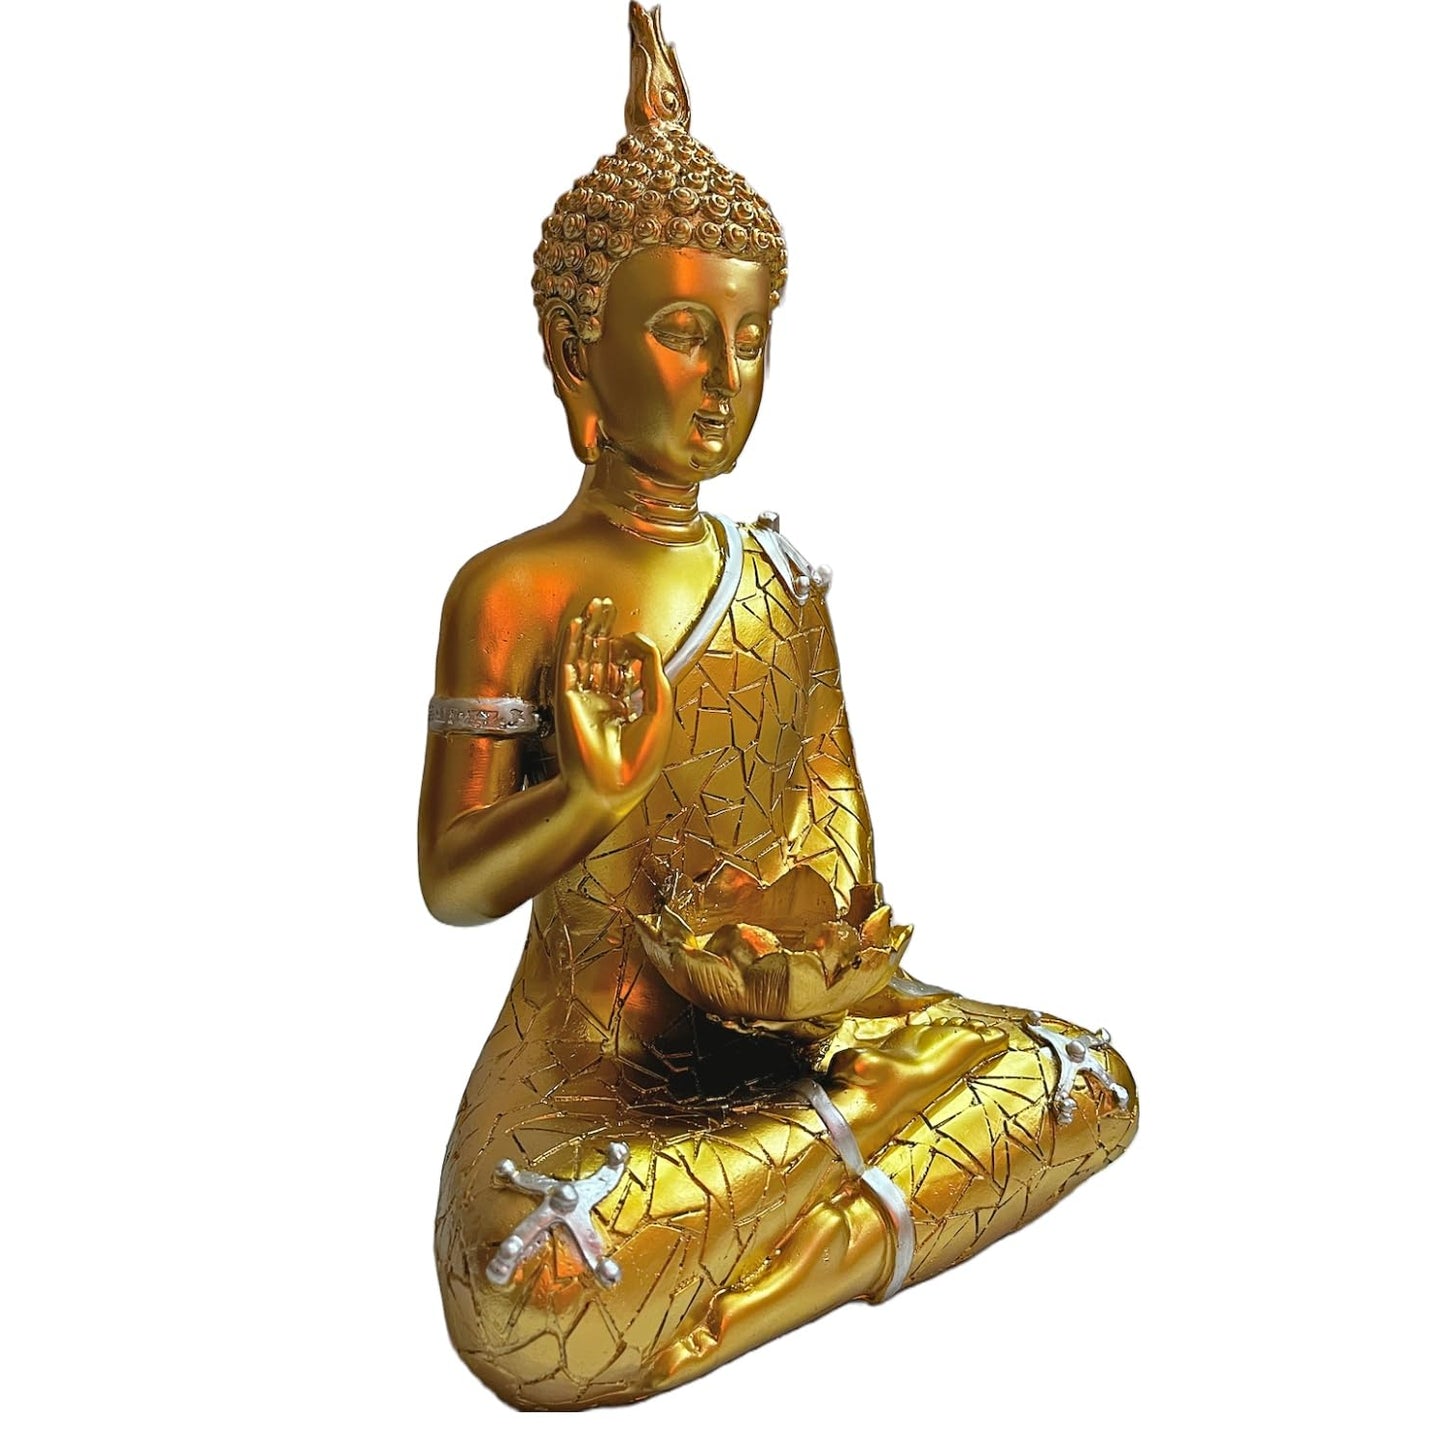 Statue ALiLA Golden Meditating Buddha Statue Idol for Home Living Room Decor, 9 Inches Statue